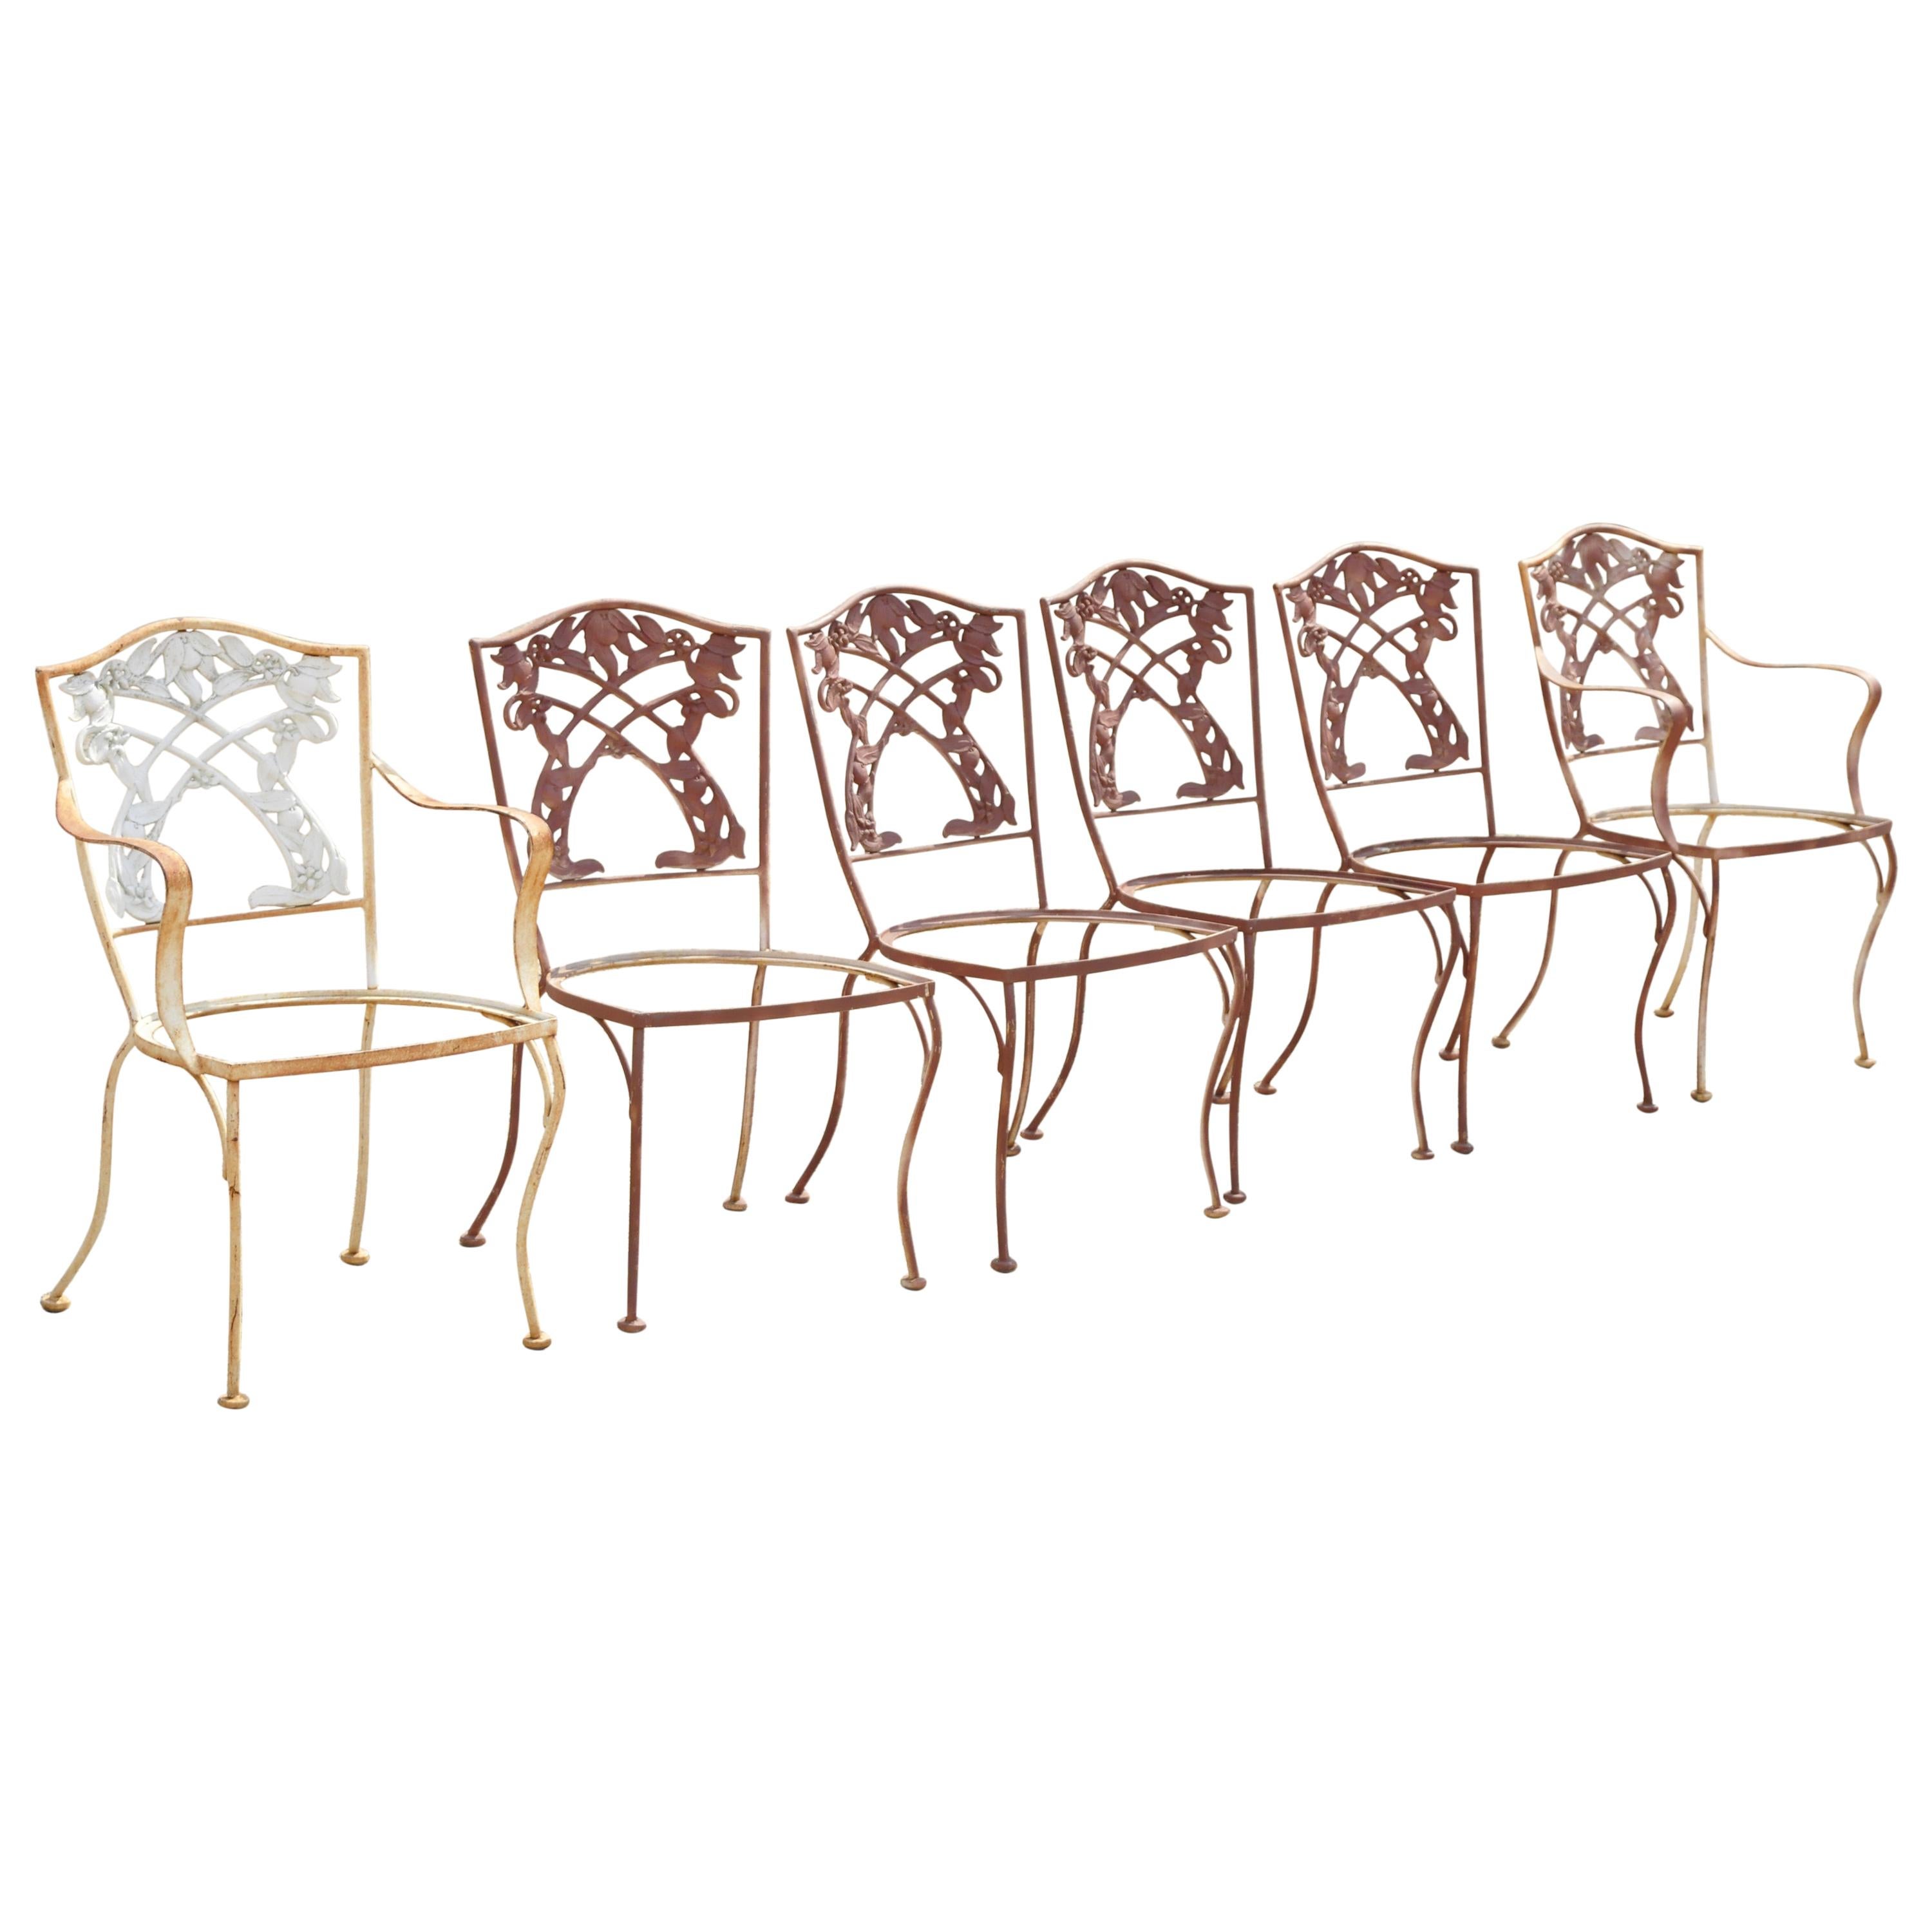 French Art Nouveau Vine Back Iron Outdoor Garden Dining Chairs, Set of 6